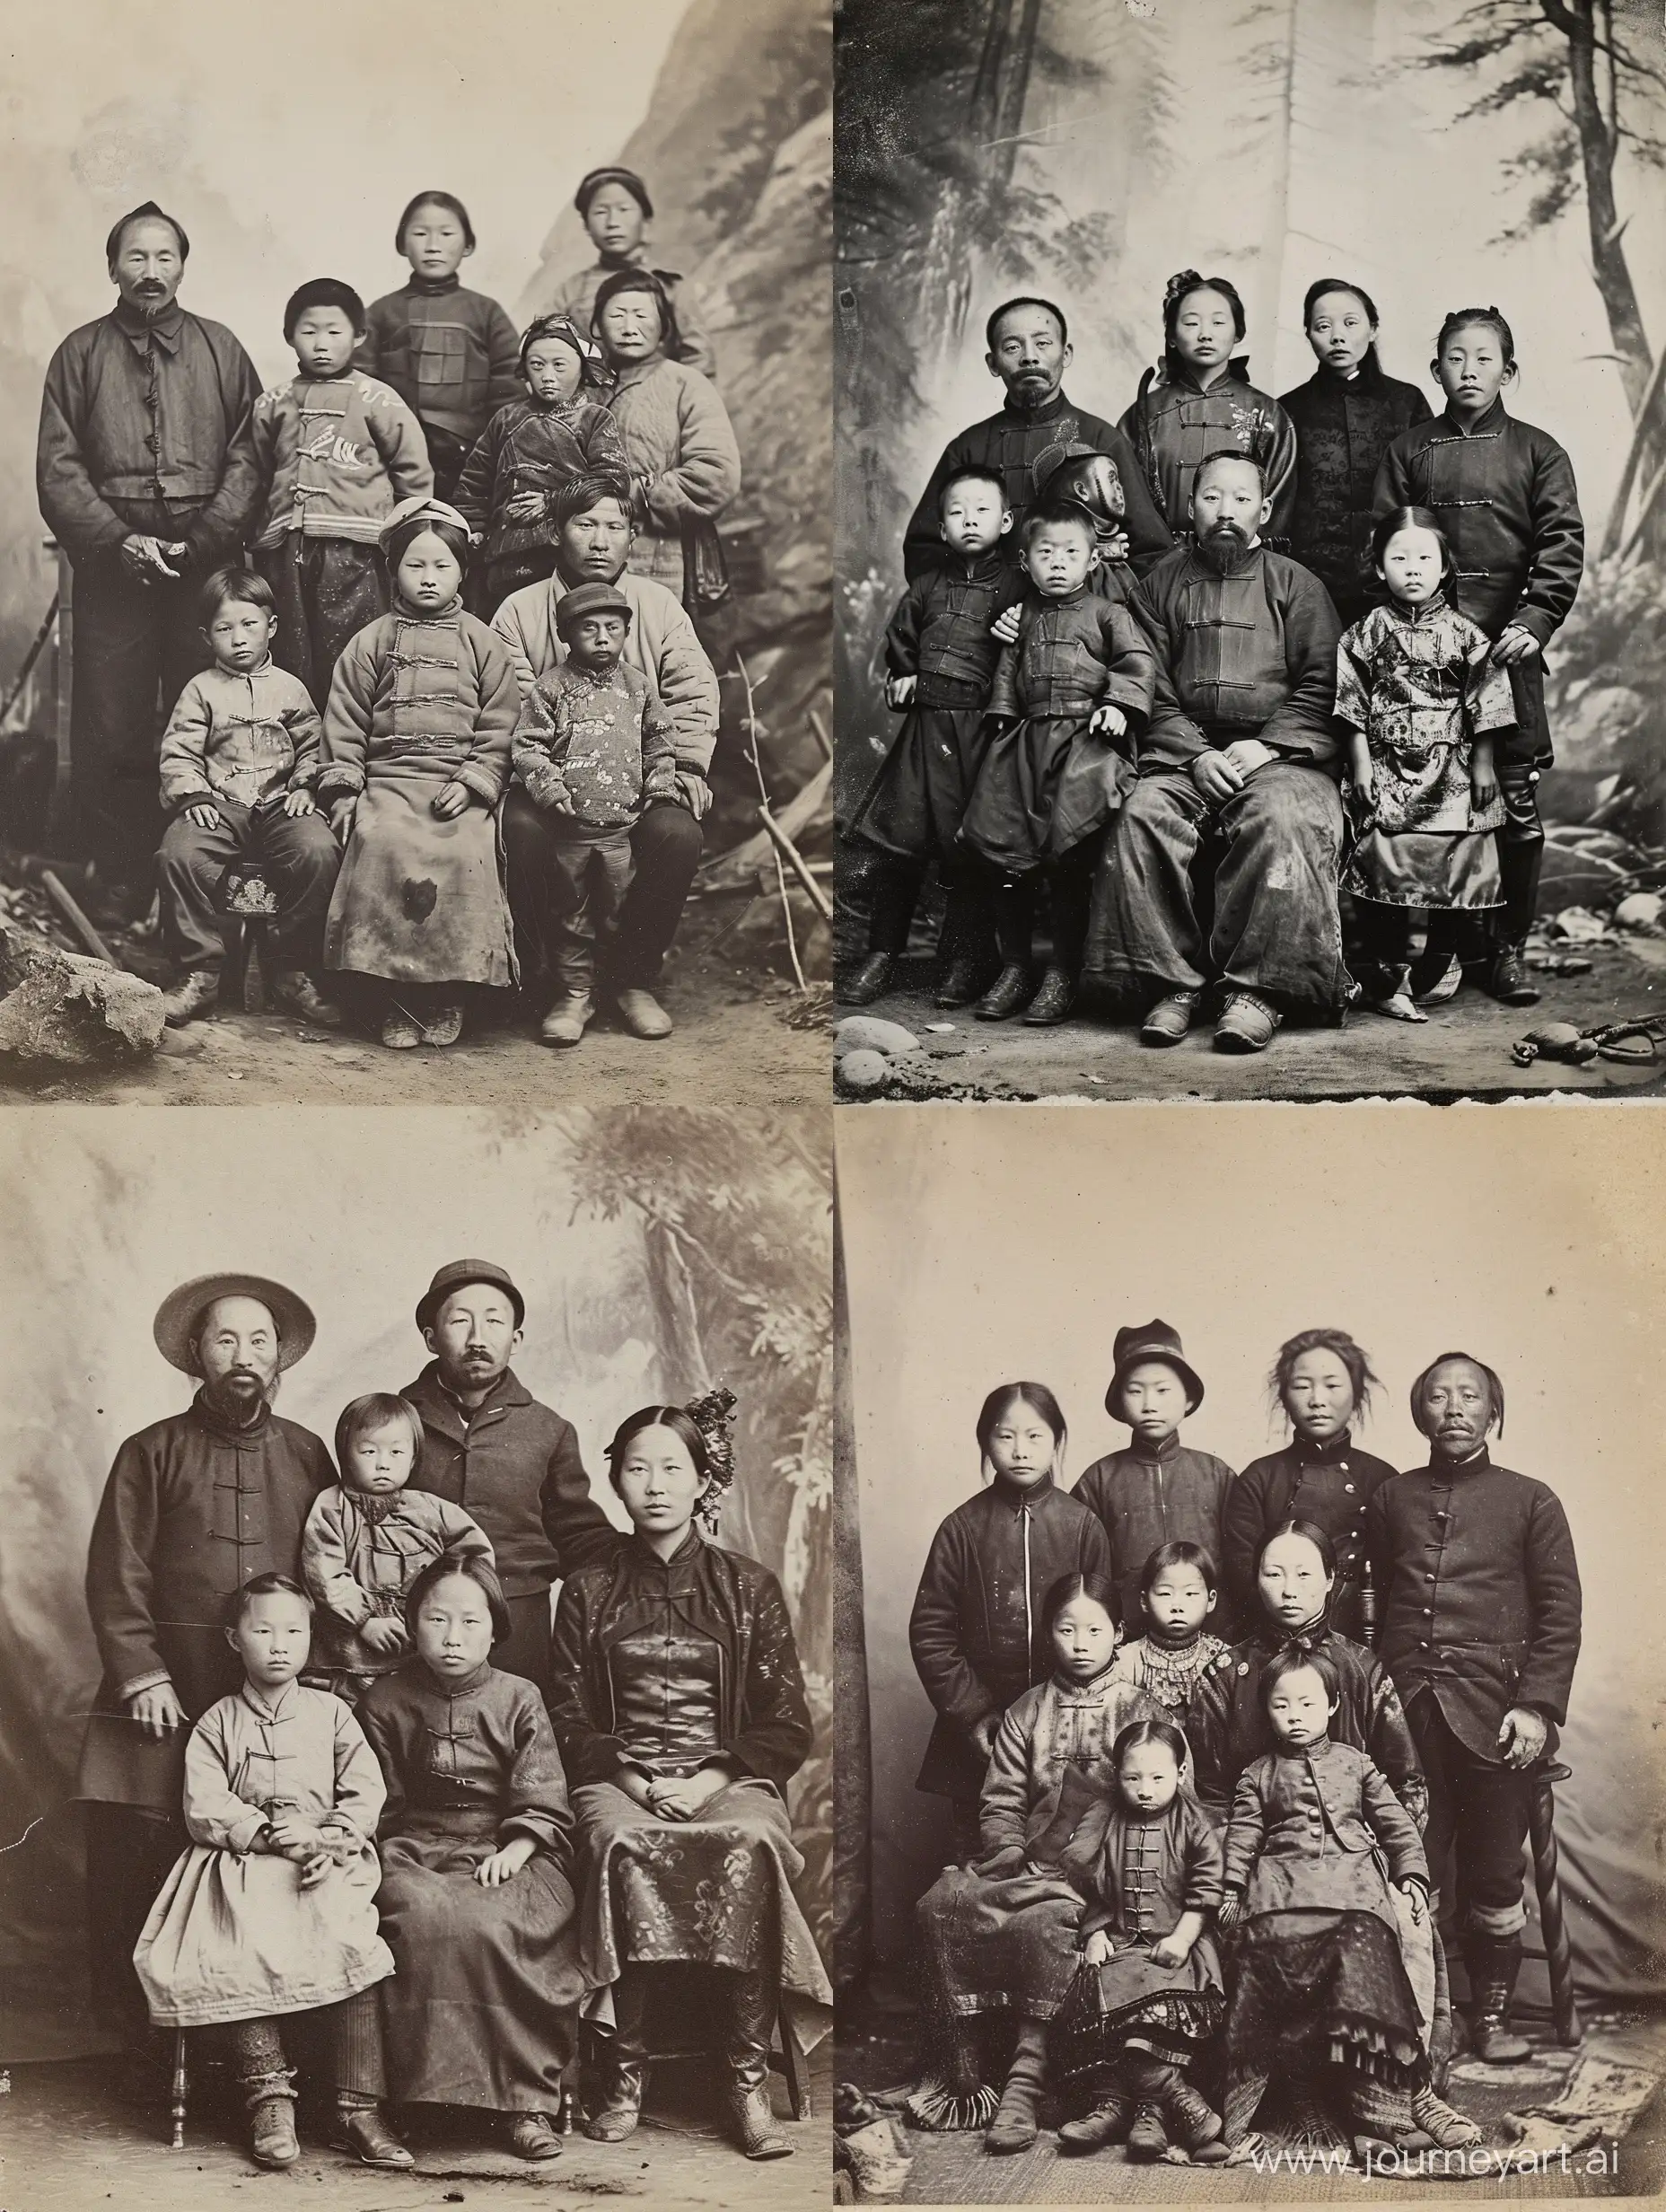 Historical black and white photographs depicting a photograph of a Chinese worker's family portrait who resides at Yosemite in the late 1800s.